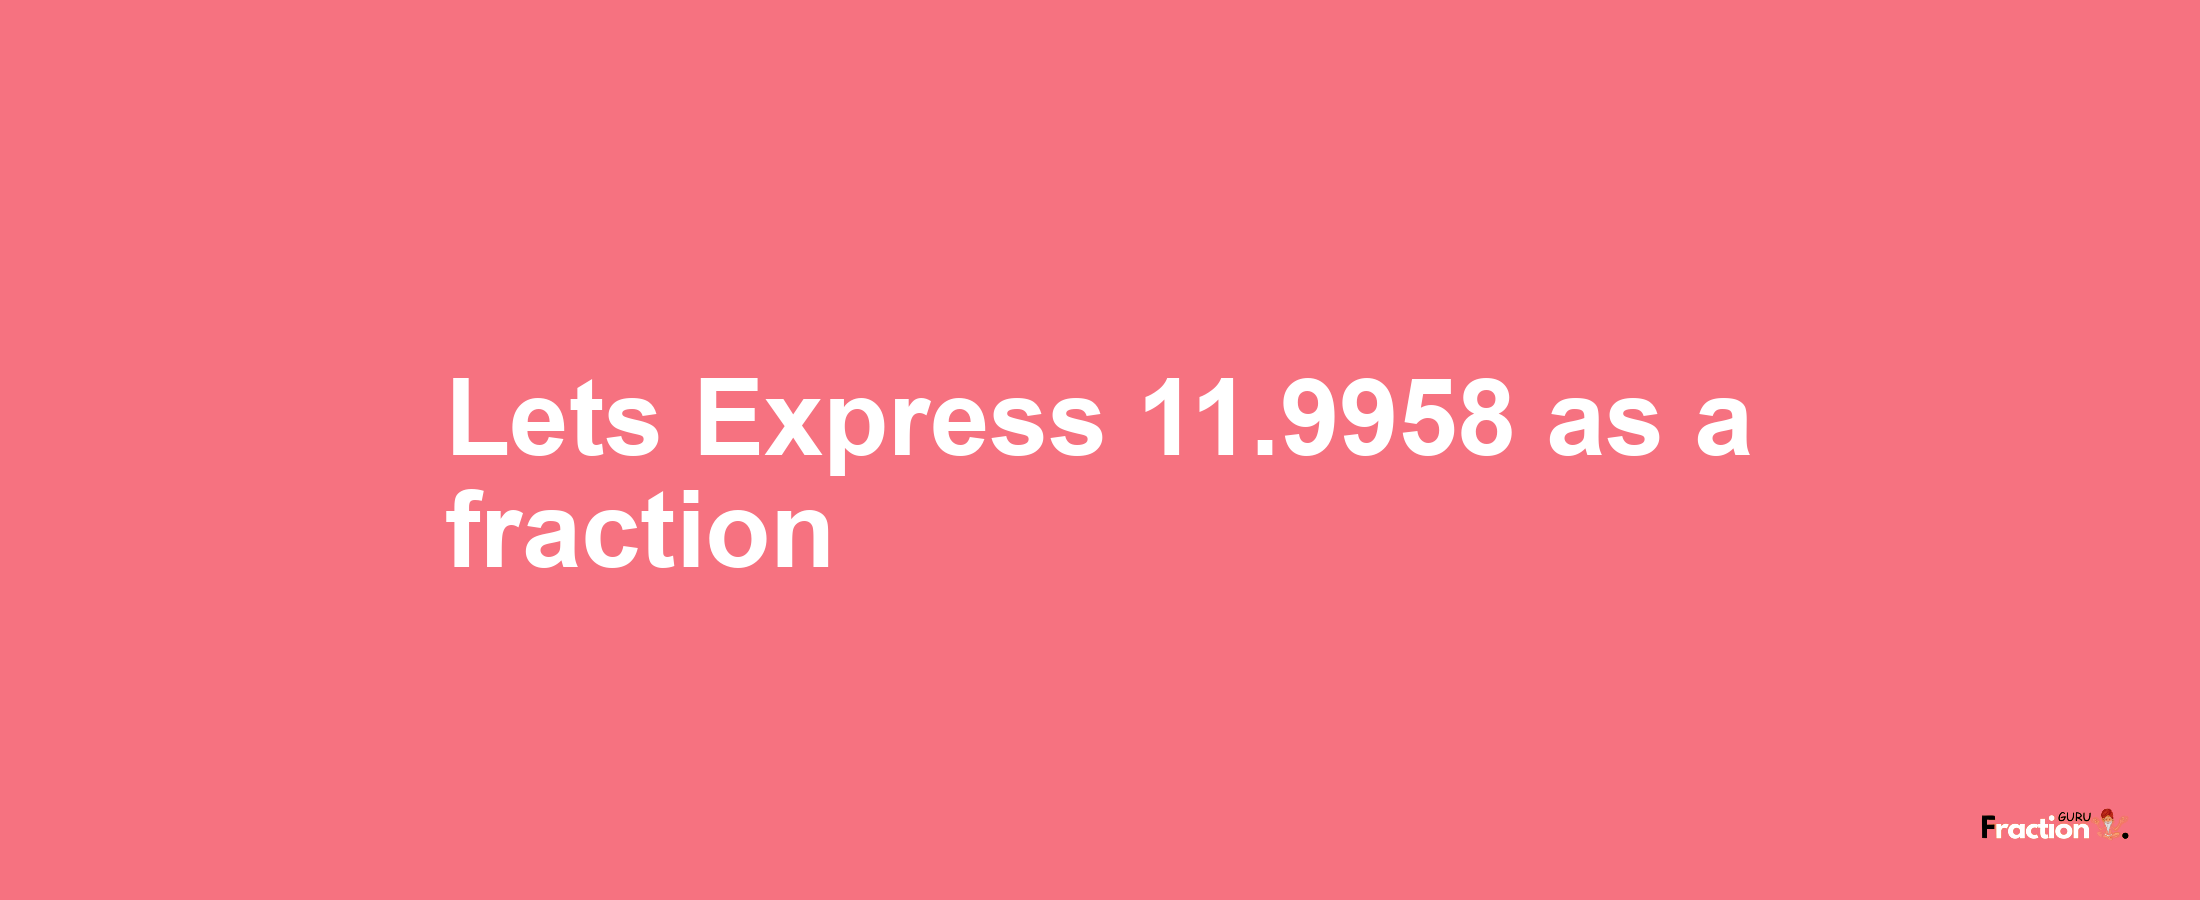 Lets Express 11.9958 as afraction